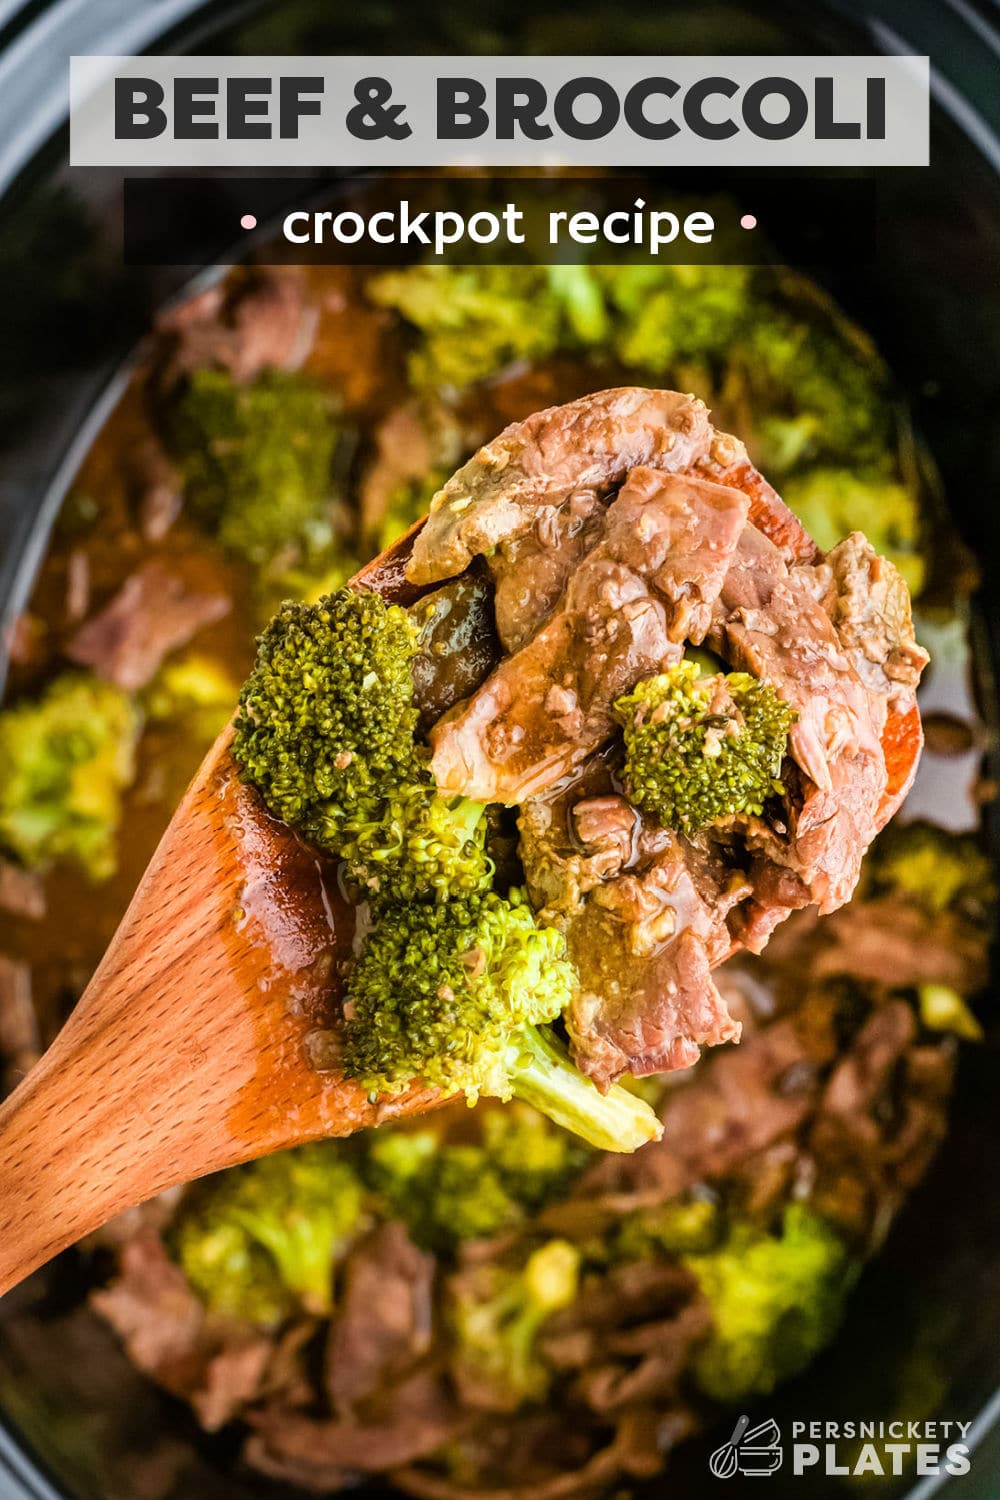 With just seven ingredients and minutes of prep time, this Slow Cooker Beef and Broccoli recipe is going to be a new family favorite! | www.persnicketyplates.com